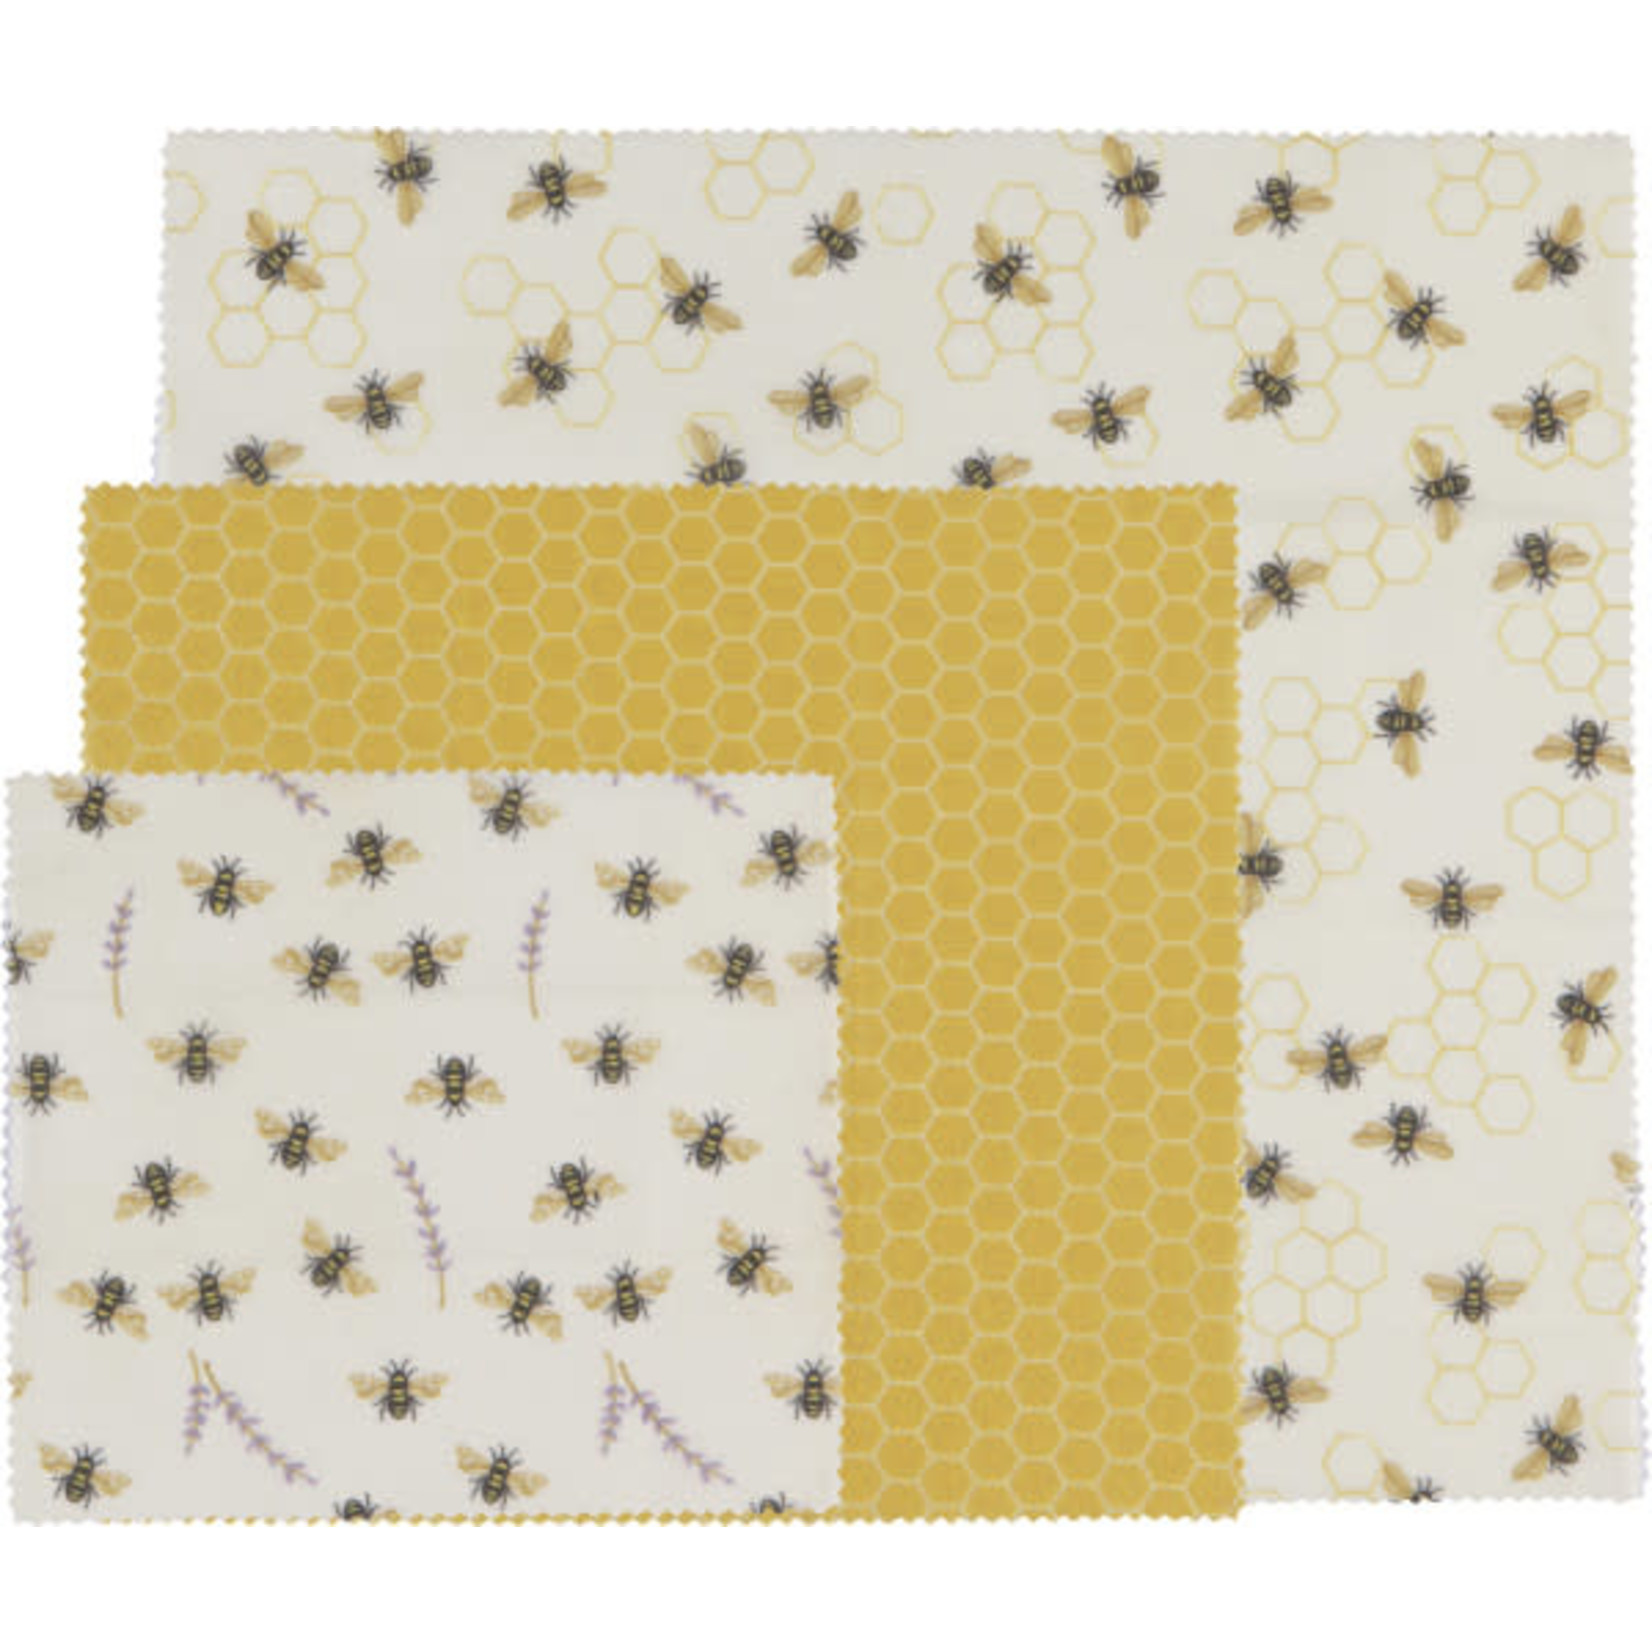 ECOLOGIE ECOLOGIE Beeswax Wrap S/3 Bees